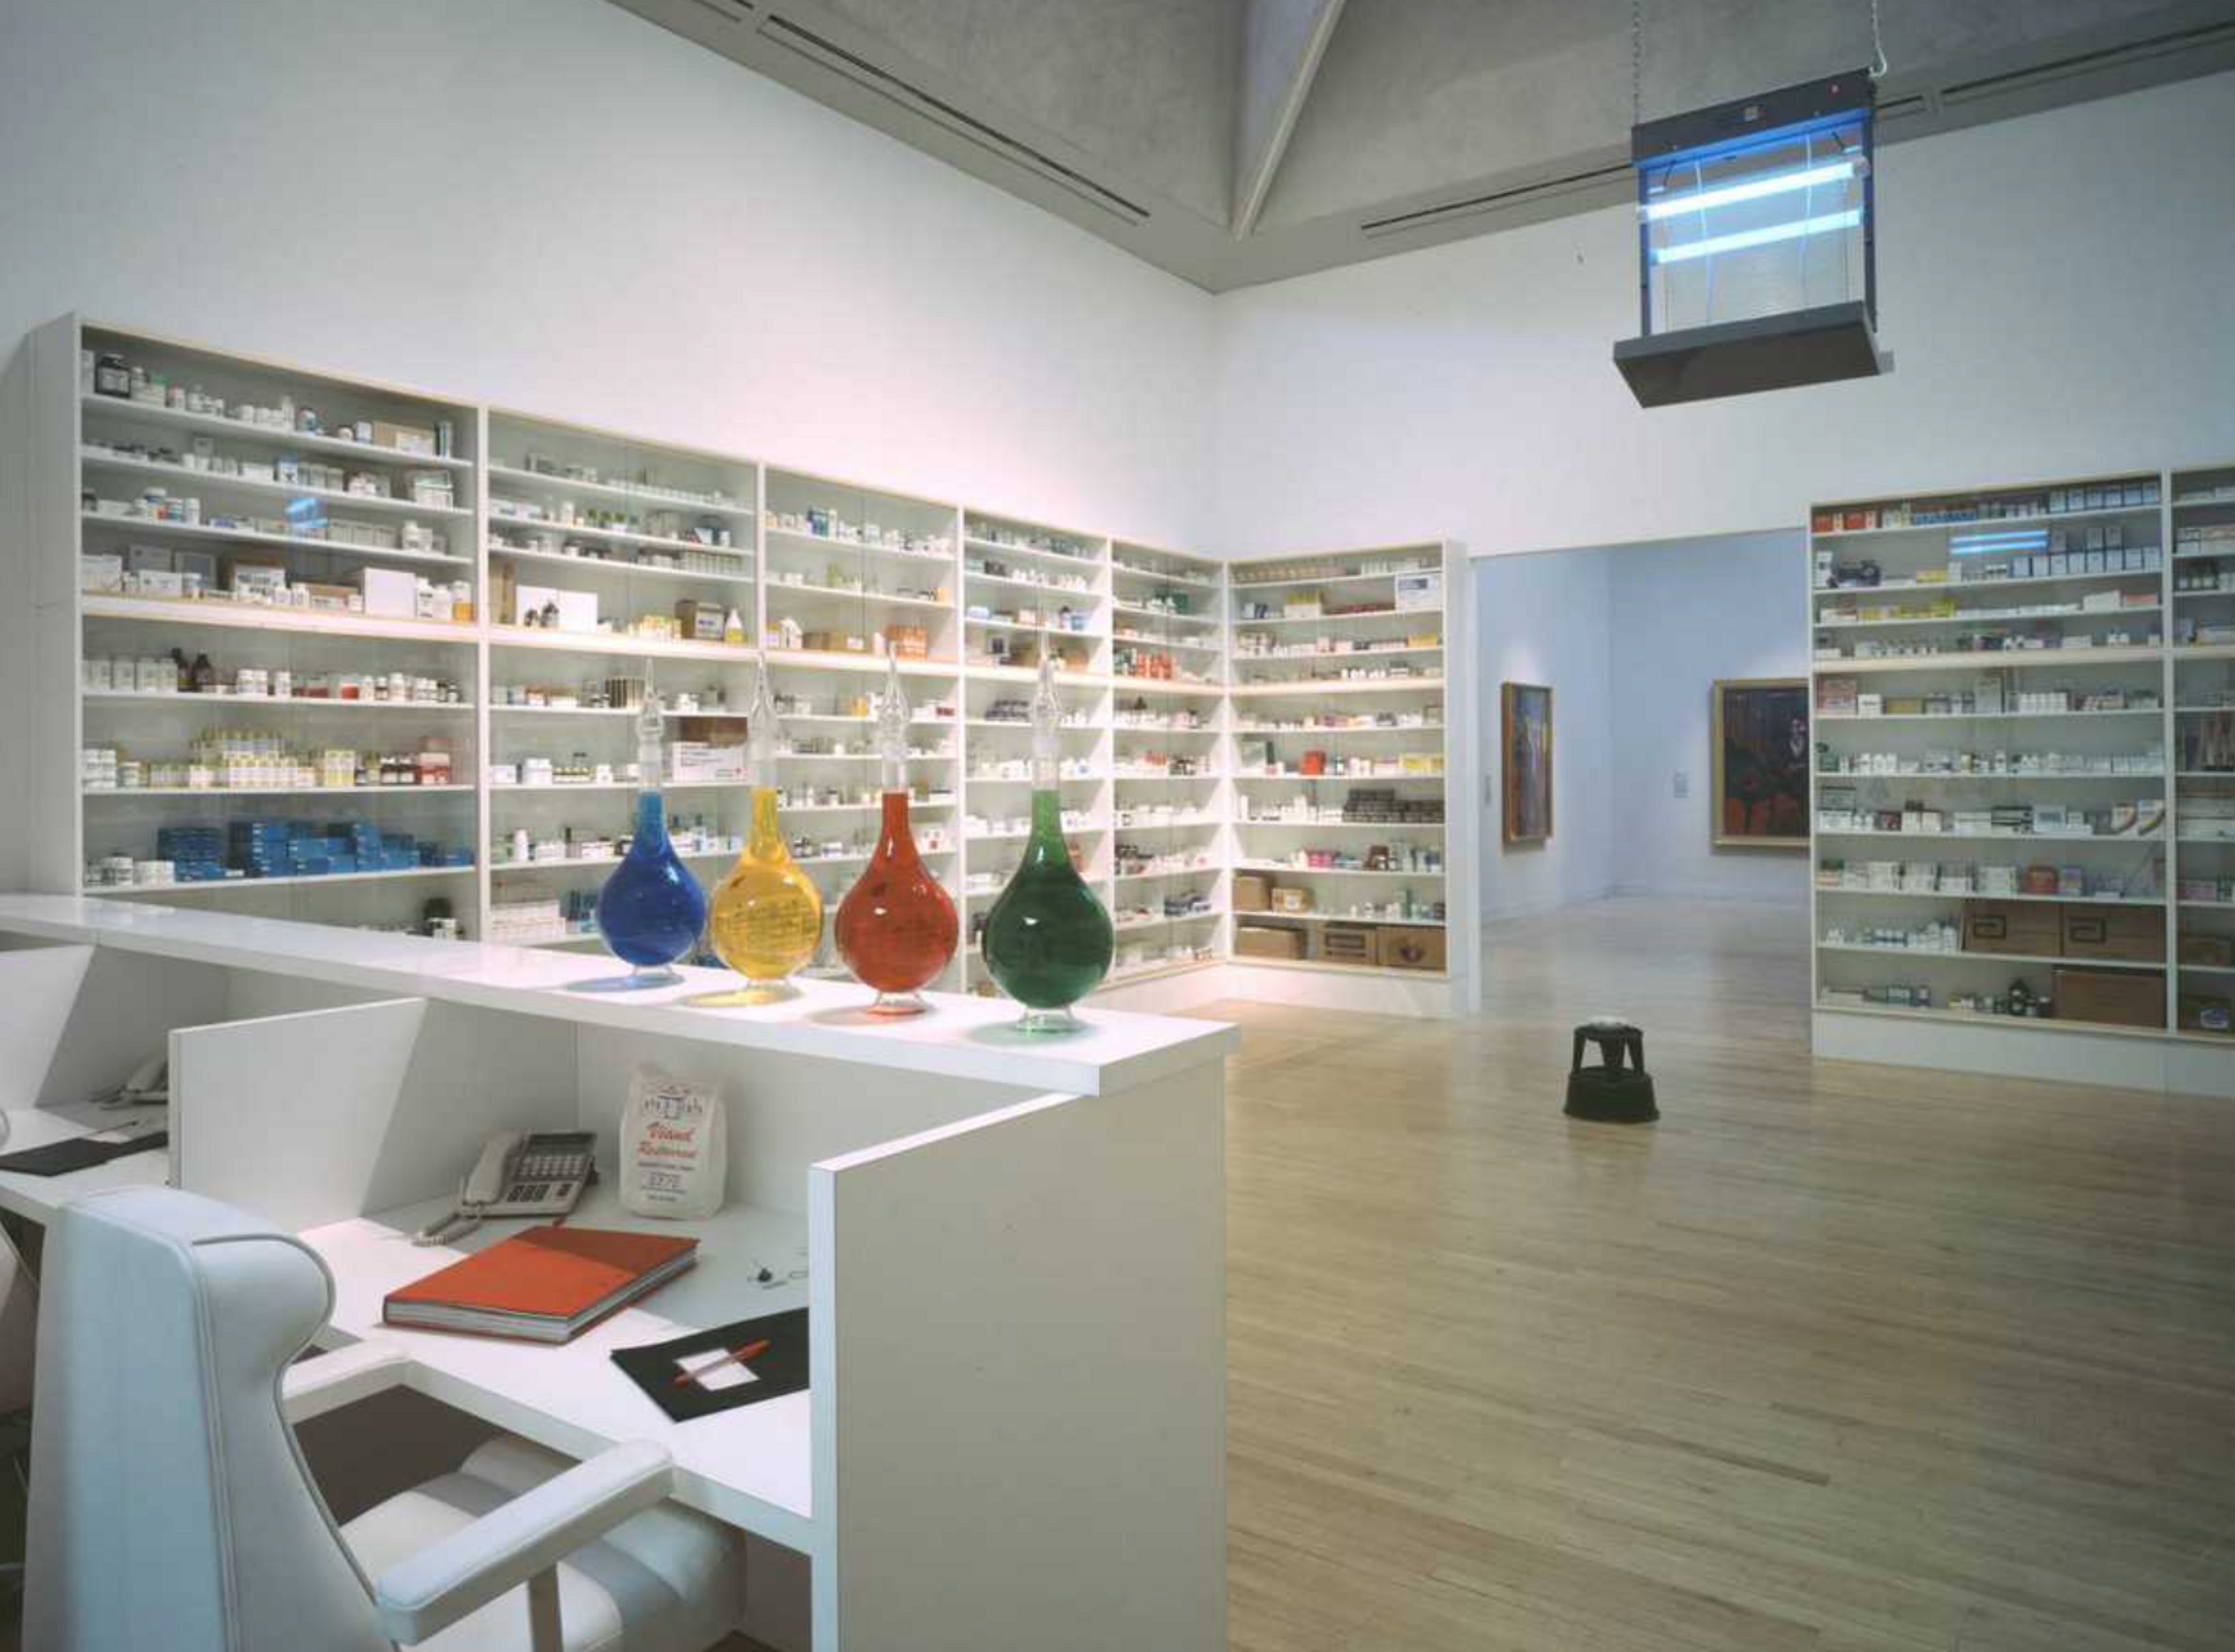 The Pharmacy by Damien Hirst